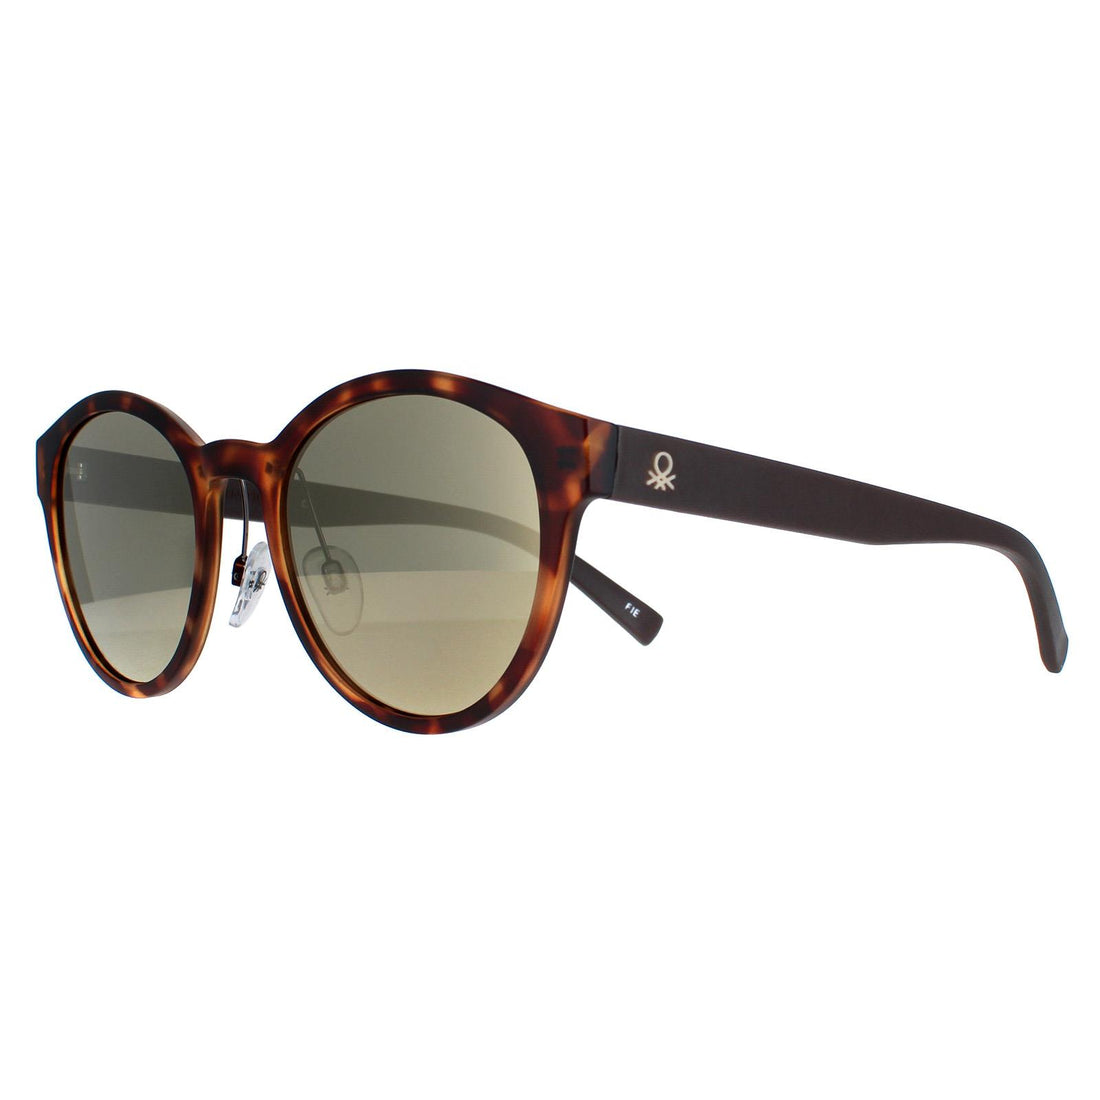 Benetton Sunglasses BE5009 112 Brown Gold Mirrored